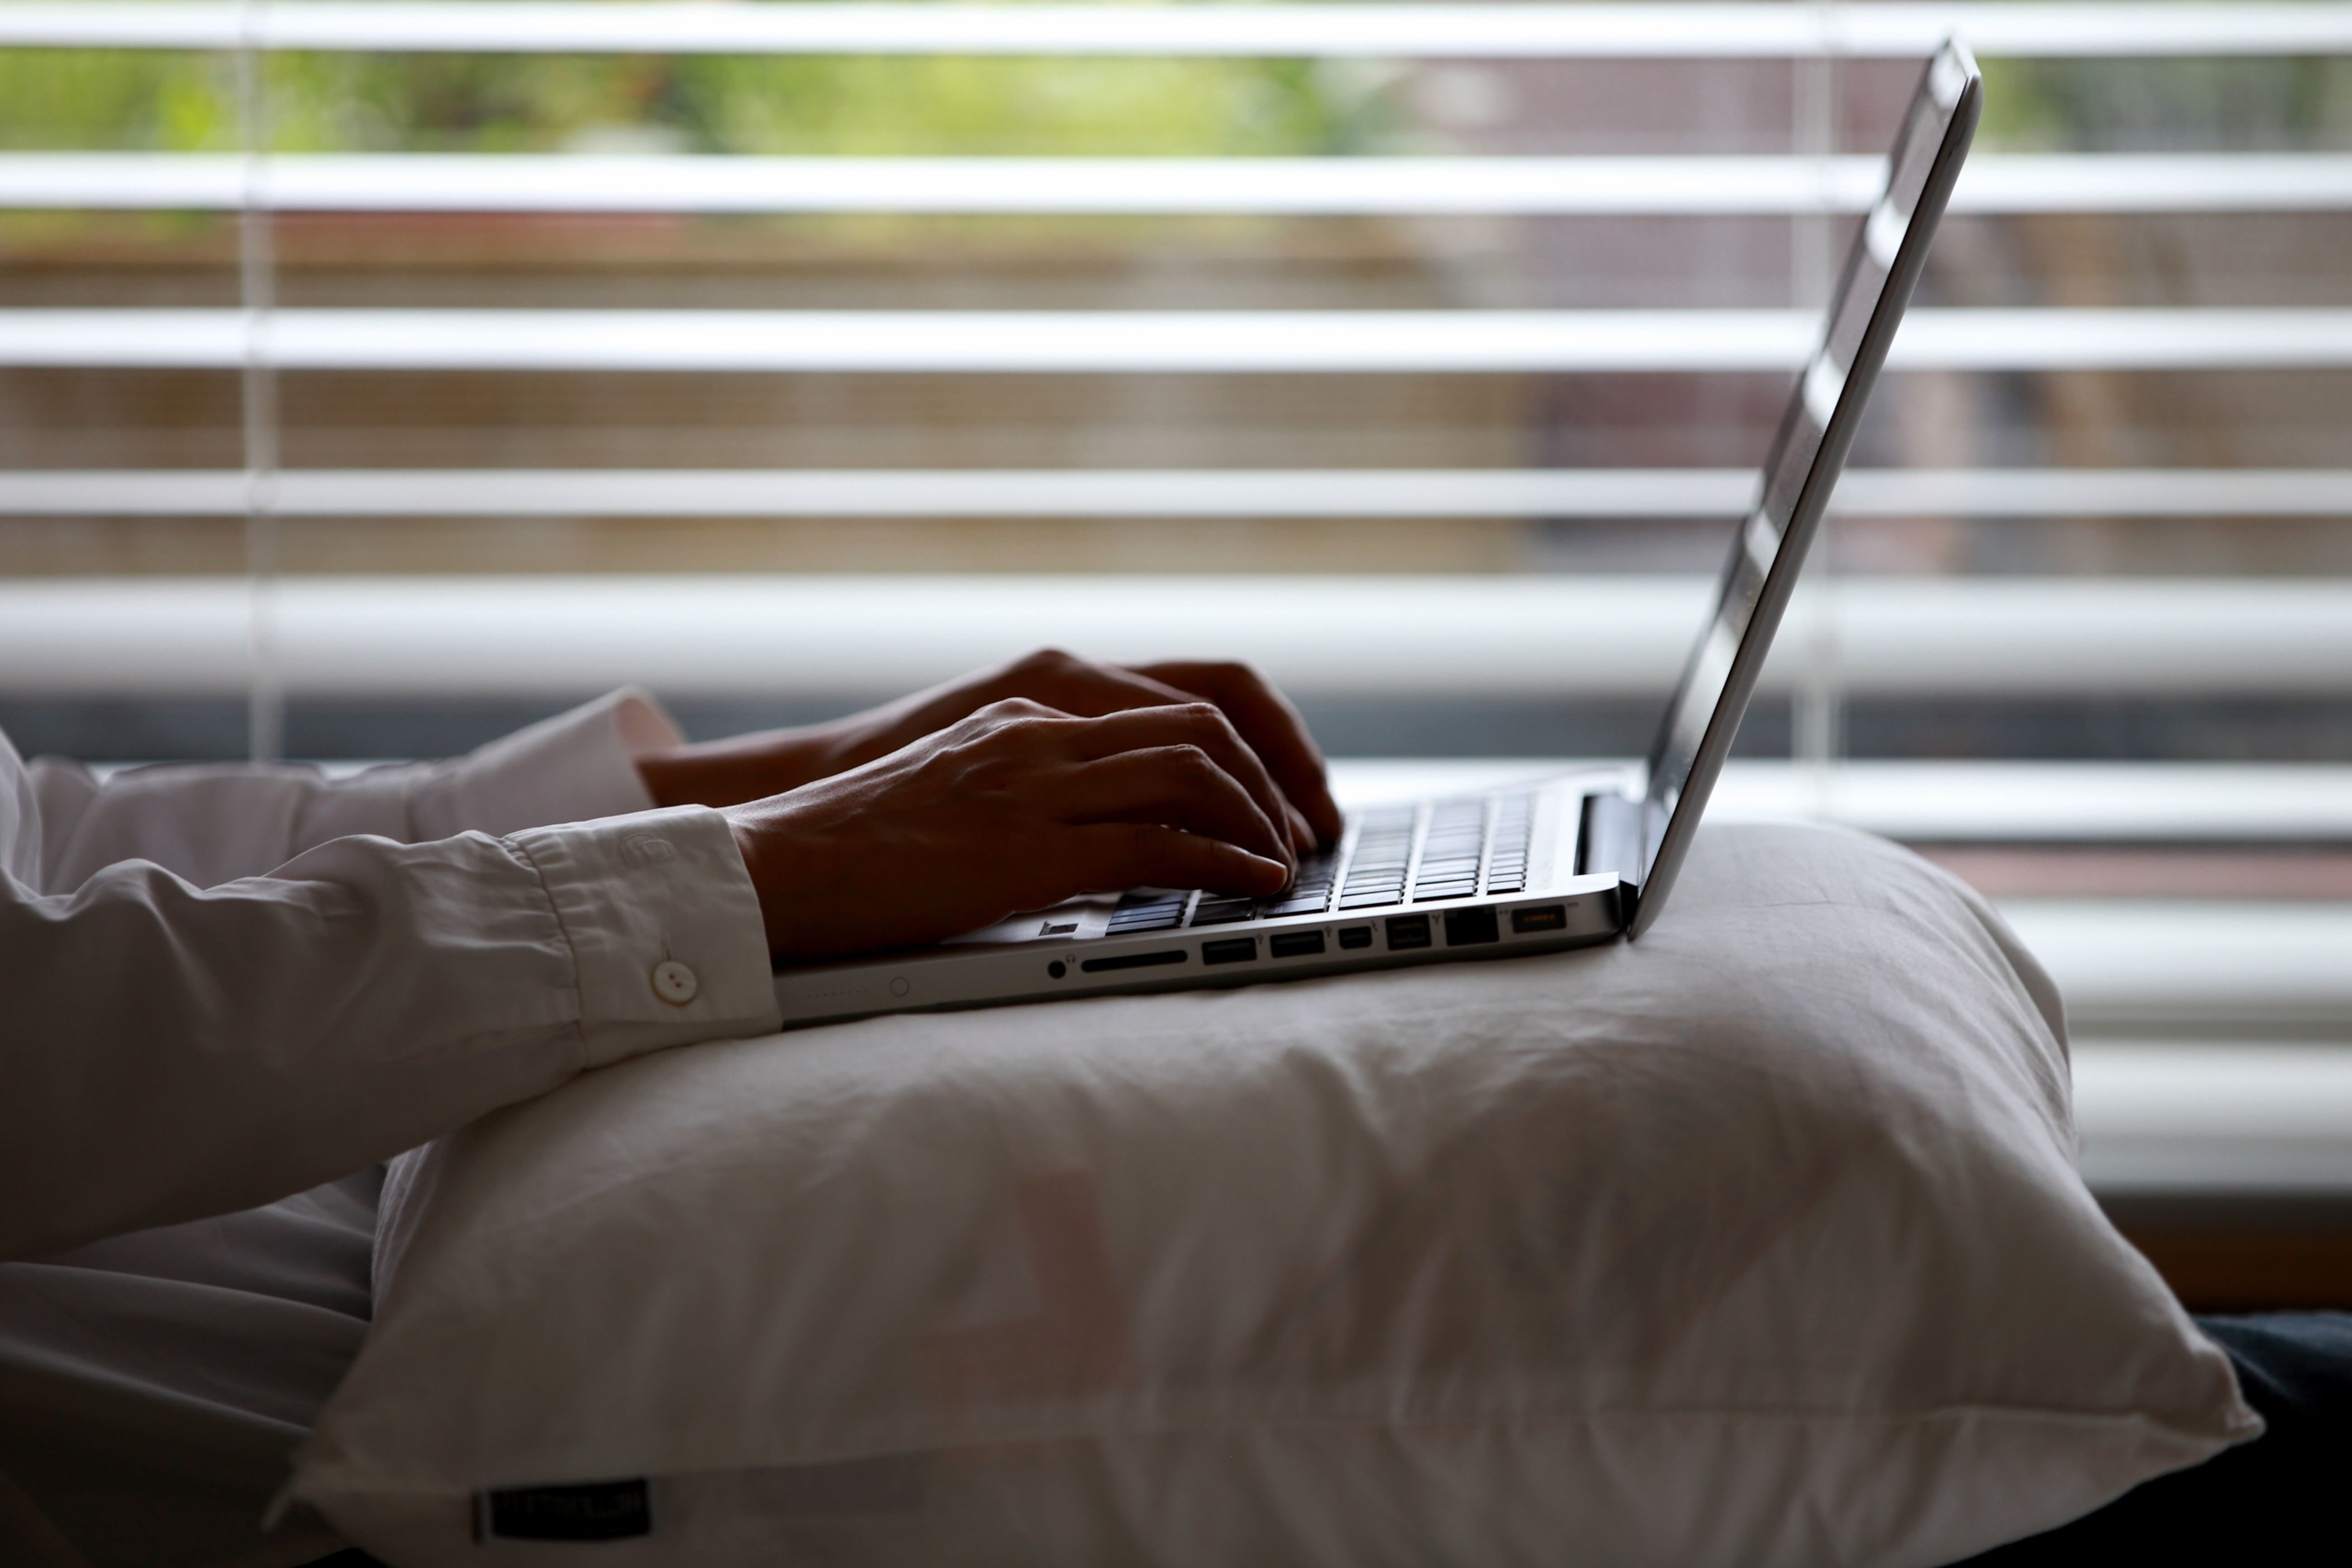 Free picture: laptop, pillow, window, computer, hands